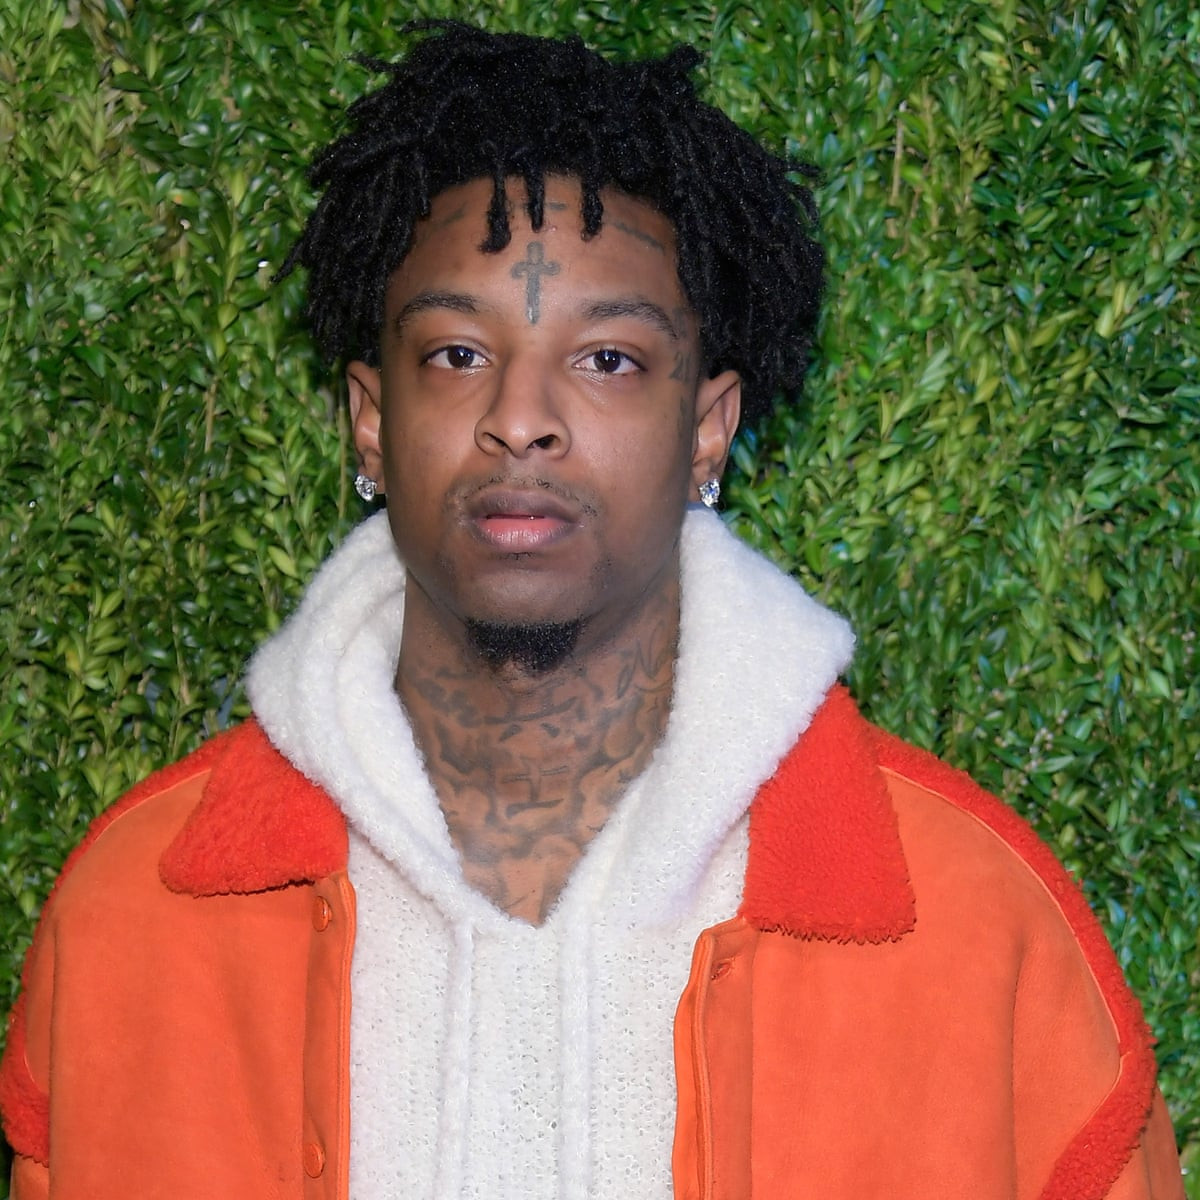 Rapper 21 Savage turns himself in after being charged with gun and drug possession in ICE case 